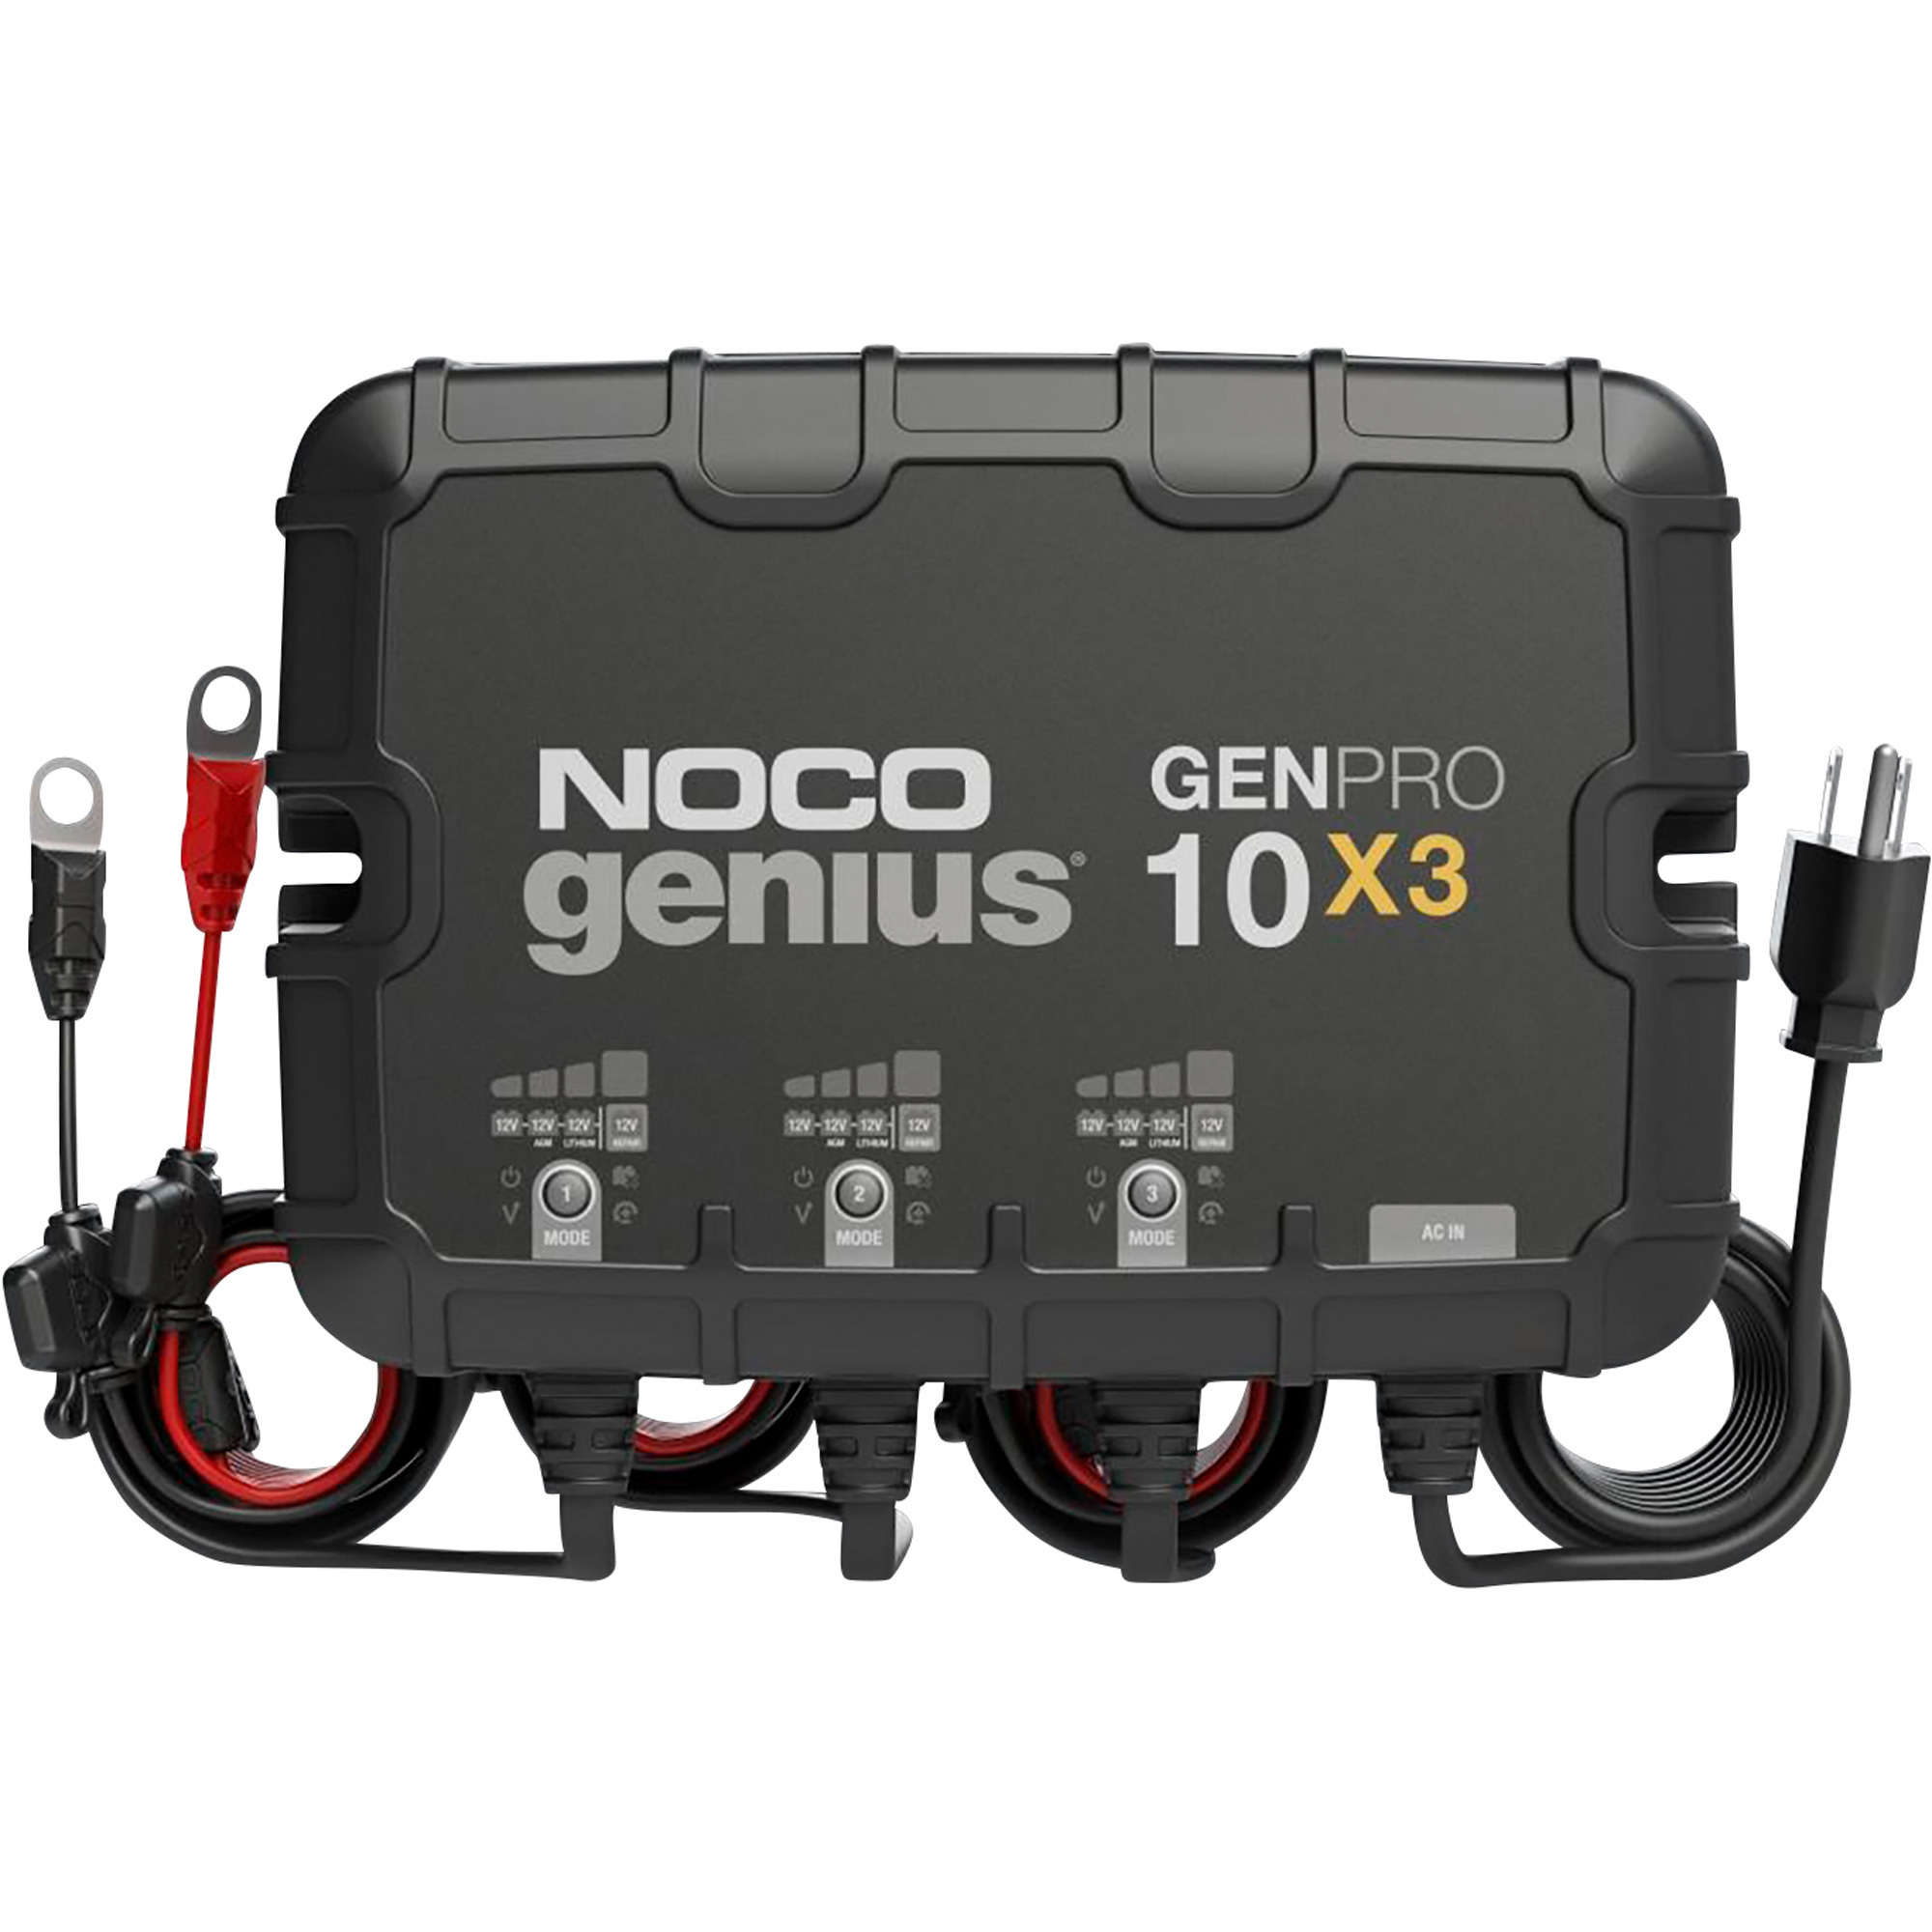 Noco Genius Onboard Battery Charger/Maintainer/Desulfator â 3 Banks, 30 Amps, Model GENPRO10X3